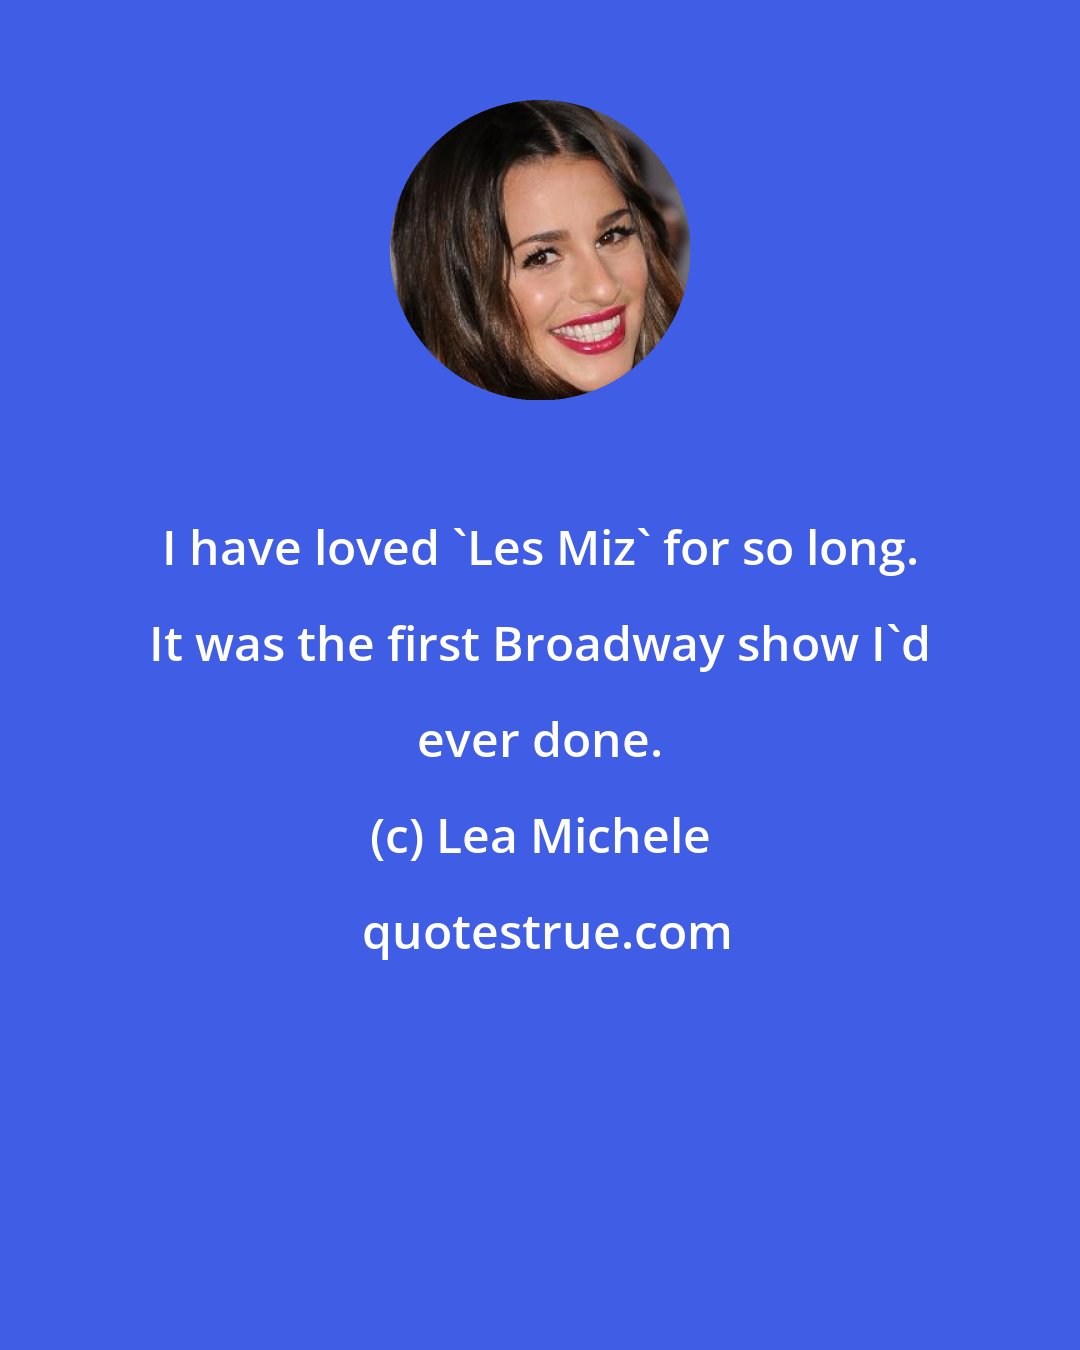 Lea Michele: I have loved 'Les Miz' for so long. It was the first Broadway show I'd ever done.